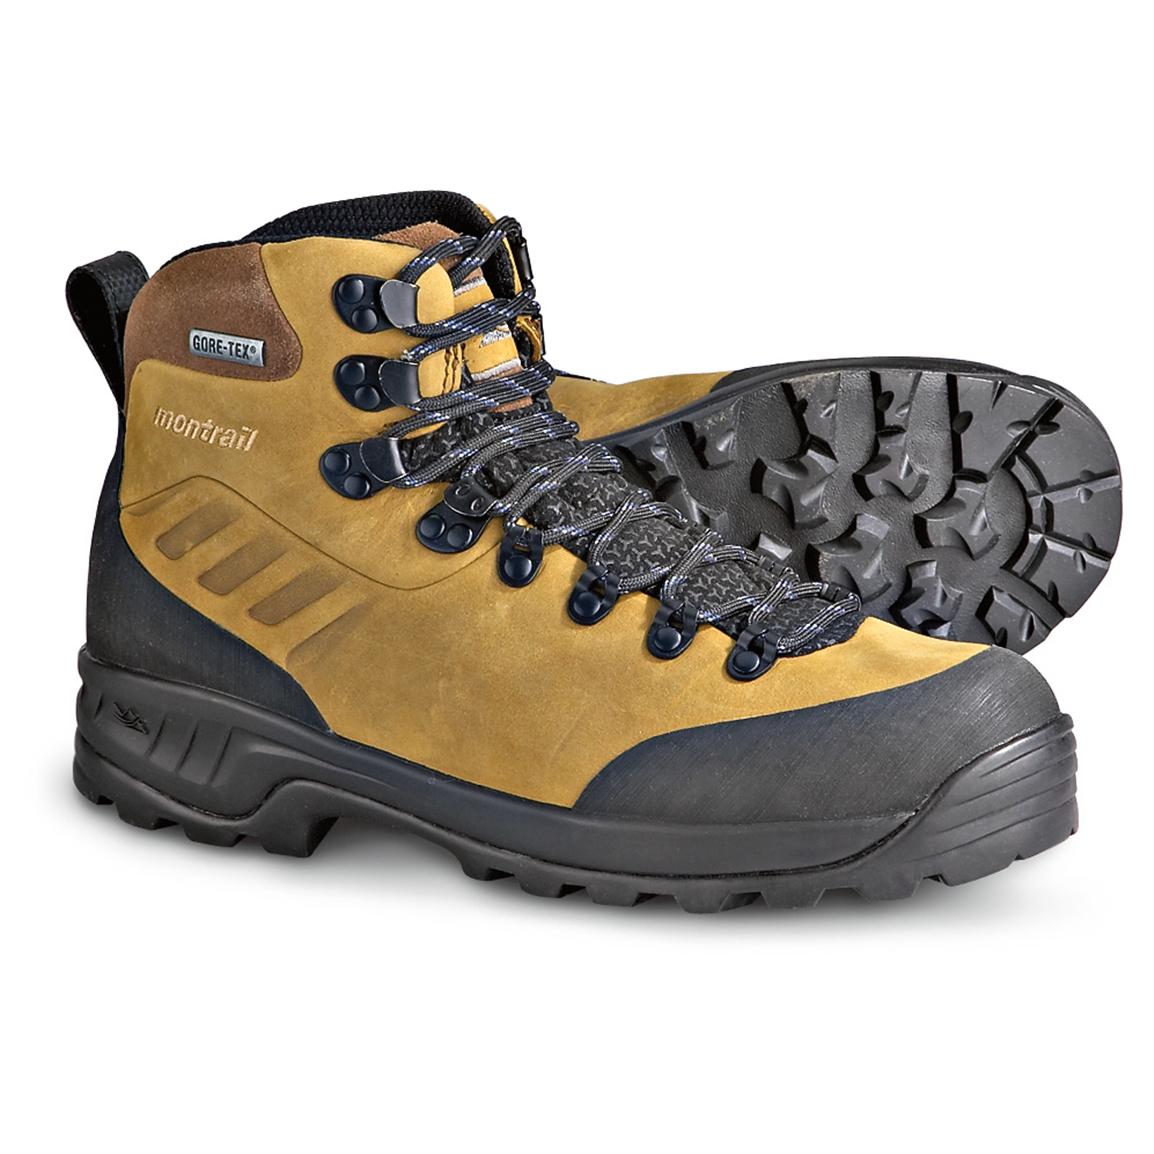 montrail gore tex hiking boots